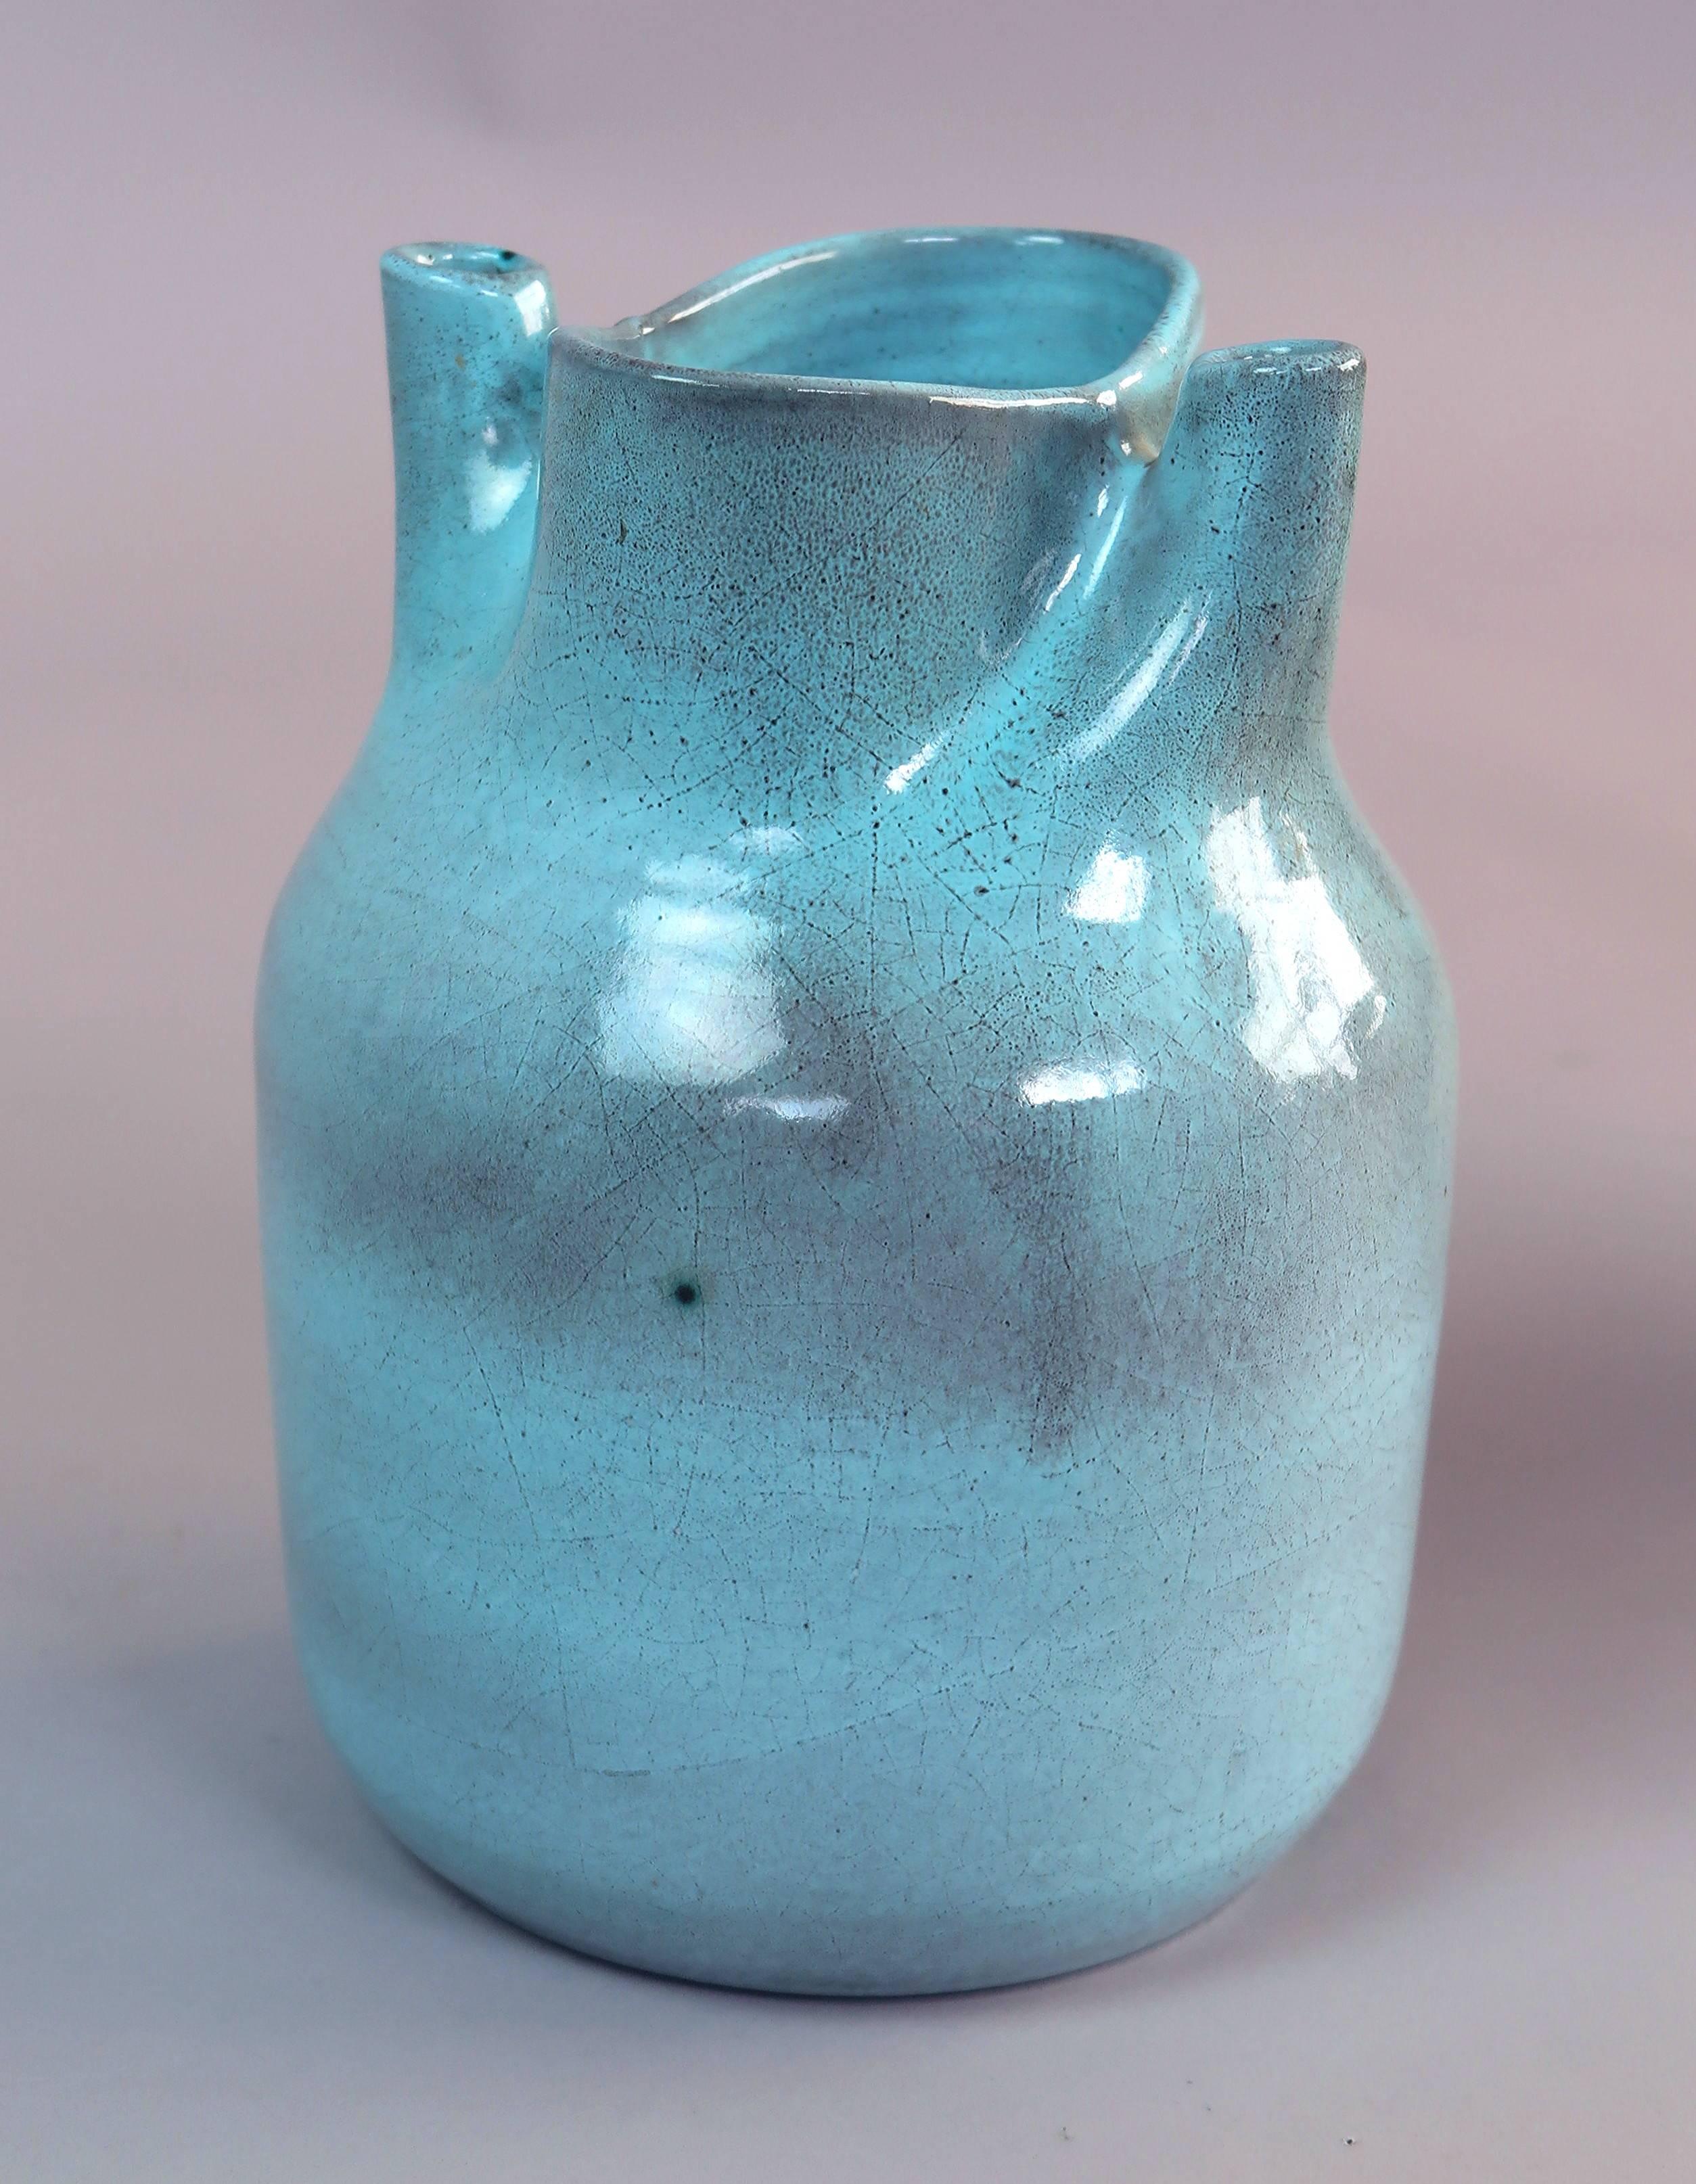 Beautiful light blue ceramic vase from the Pottery Accolay, France, handmade in the 1970s.